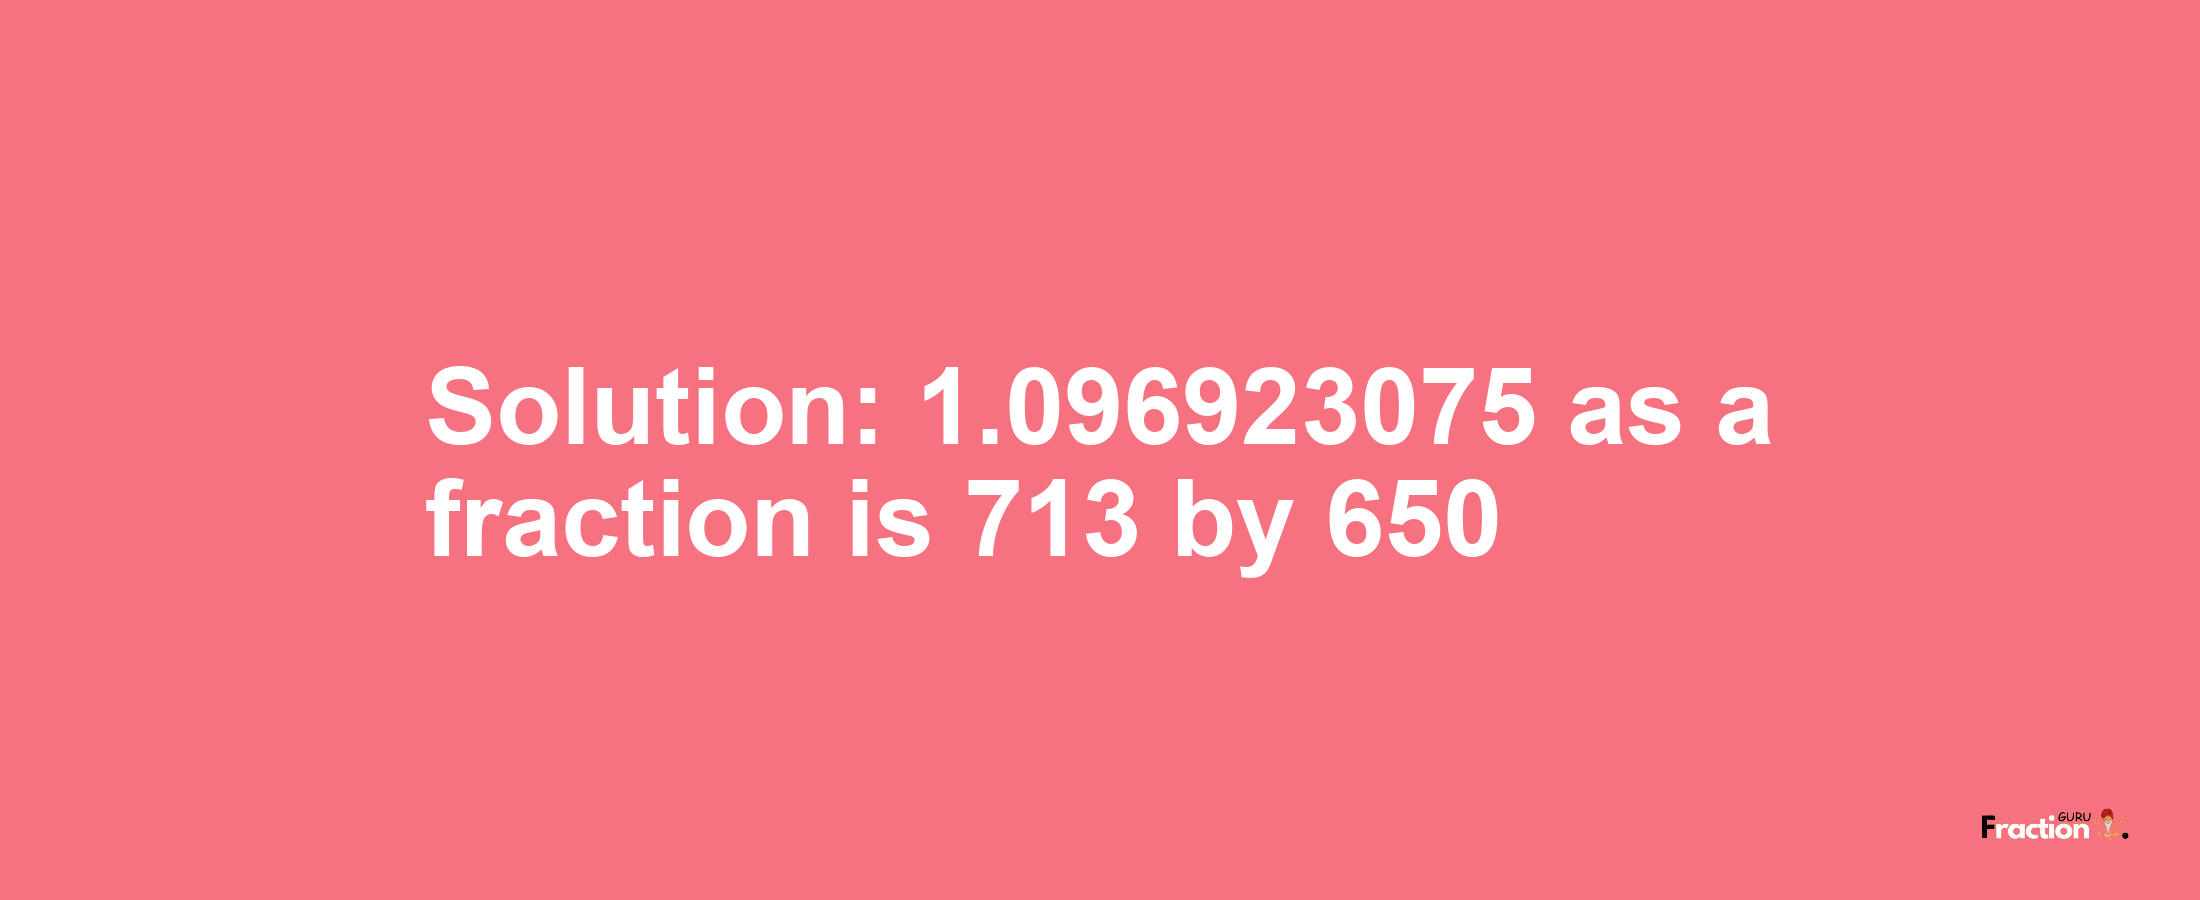 Solution:1.096923075 as a fraction is 713/650